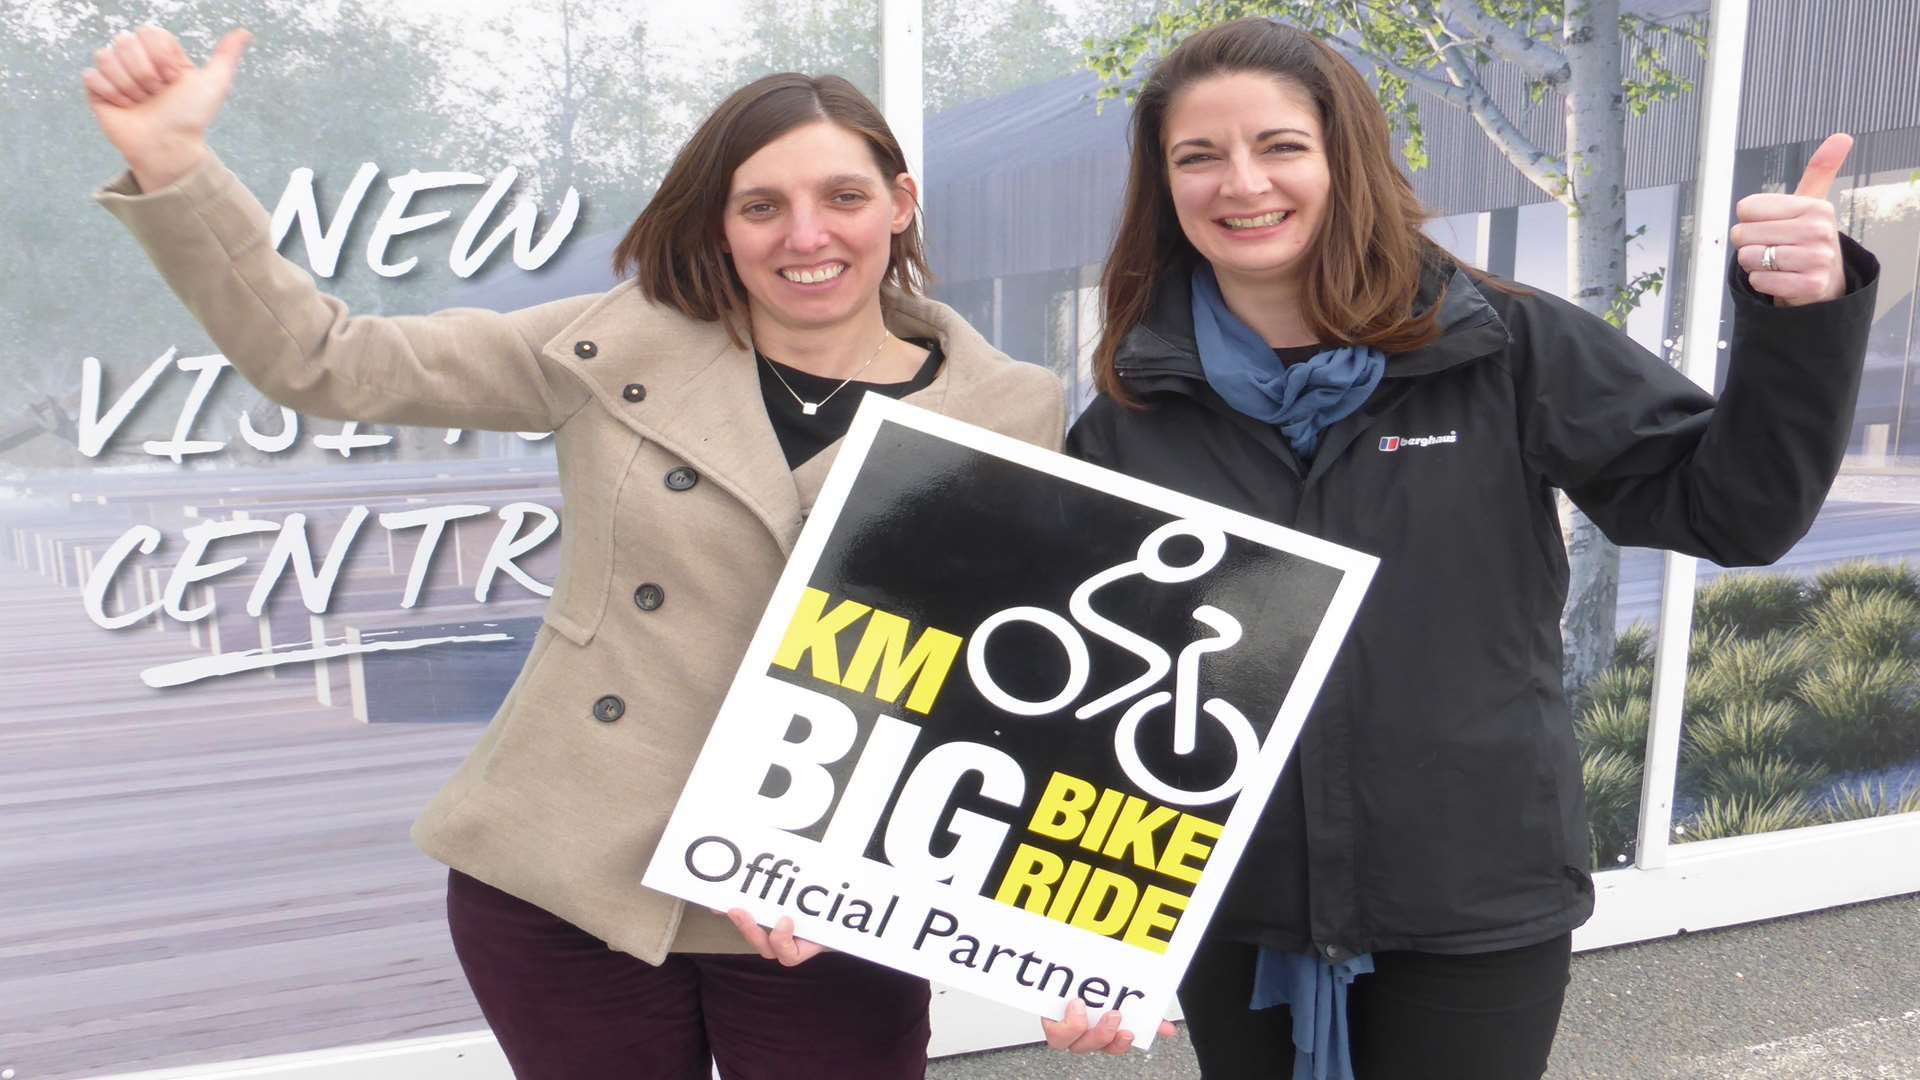 Lorraine Cheesmur and Lynette Crisp of Betteshanger Parks, Nr Deal announce support for the KM Big Bike Ride which takes place on Sunday, April 24.